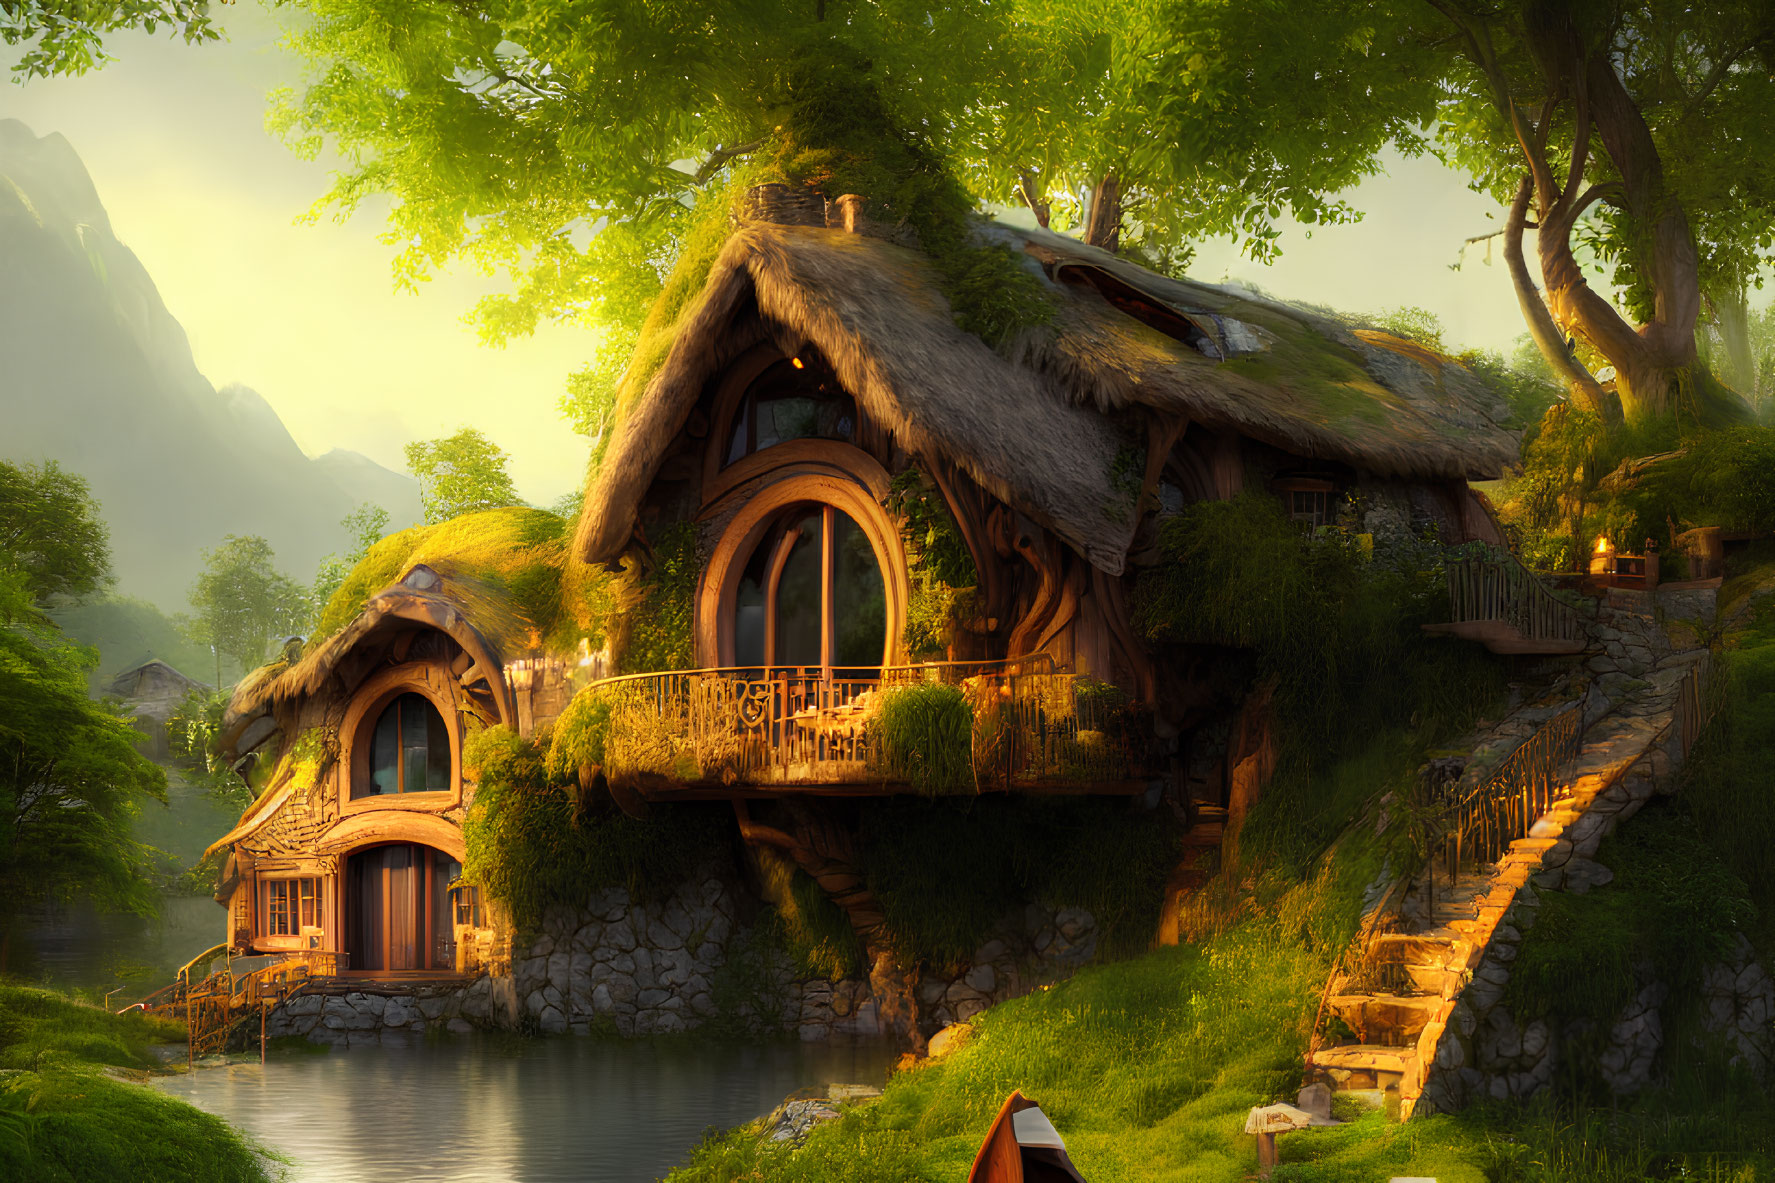 Charming fantasy cottage with thatched roofs in serene lakeside setting